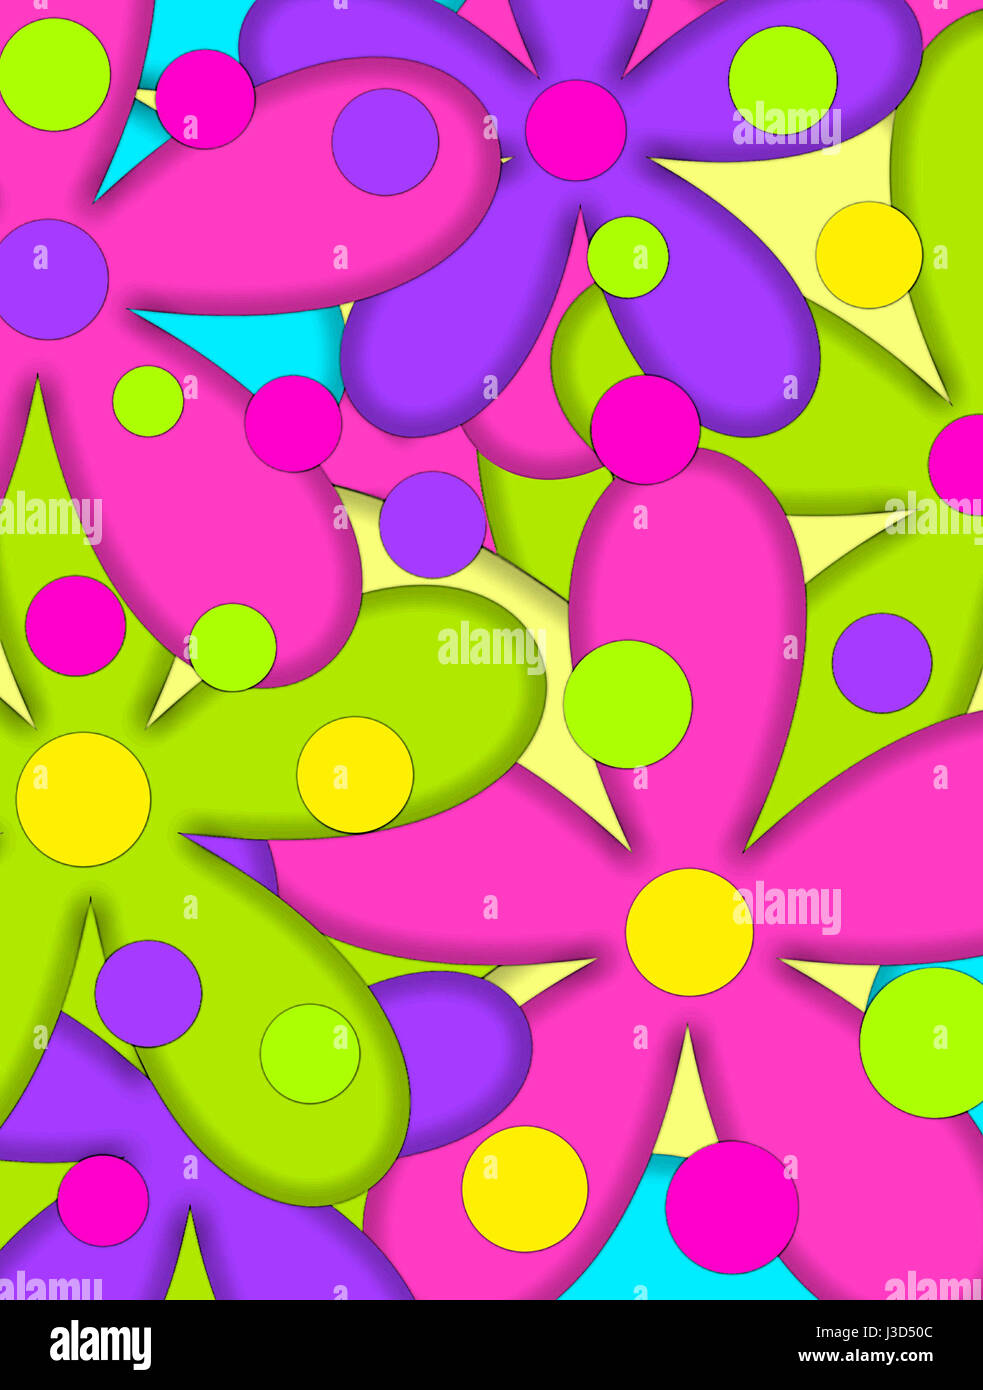 Big daisy-like flowers fill image with wild colors of hot pink, lime green, purple and aqua.  Large polka dots top colorful flowers. Stock Photo